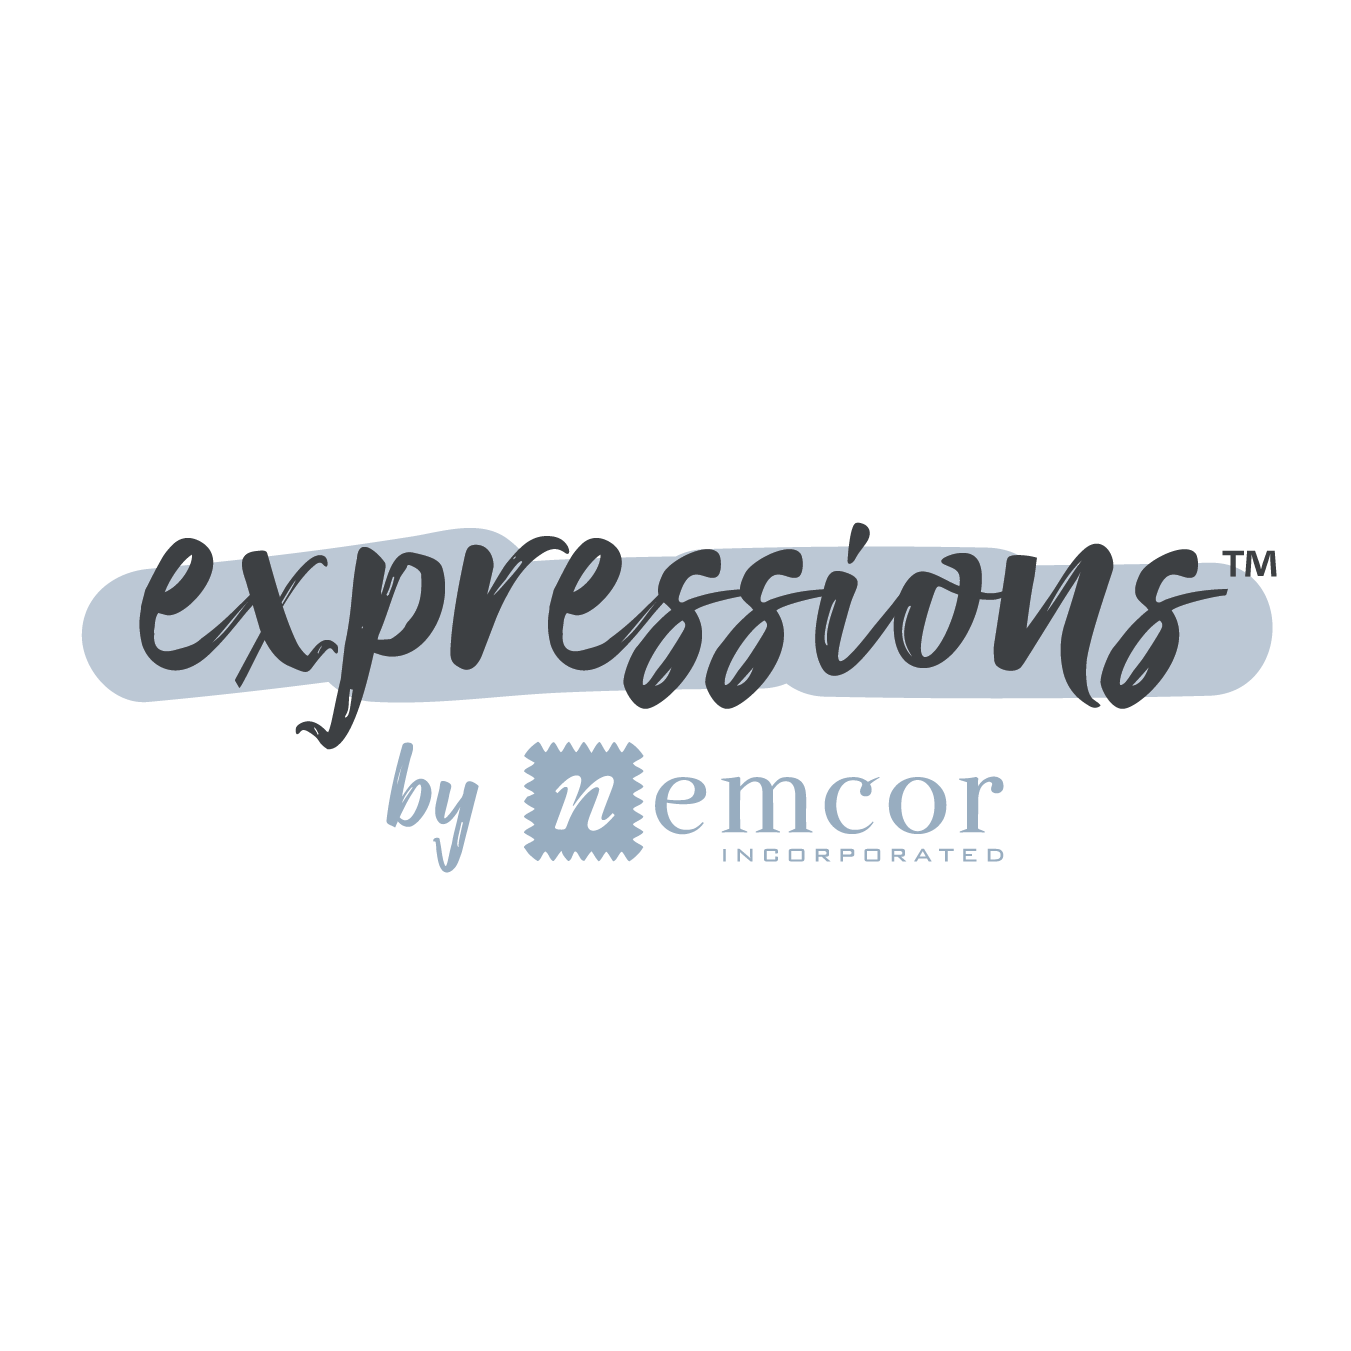 Shop EXPRESSIONS by Nemcor Incorporated products